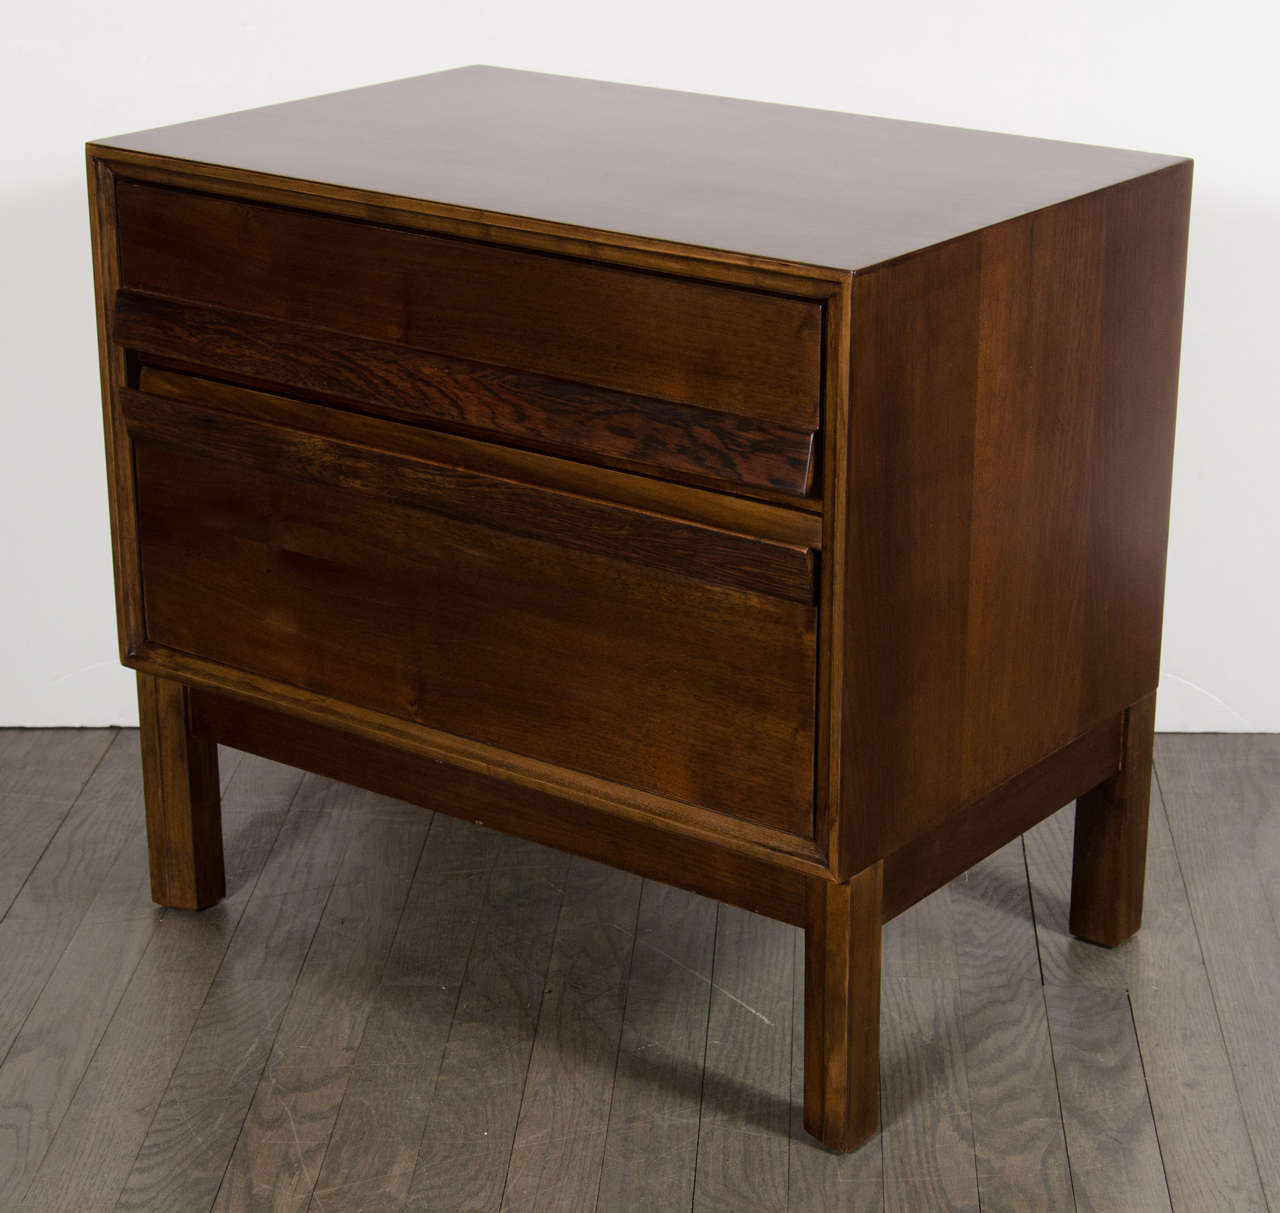 This gorgeous pair of Mid-Century Modernist night stands / end tables are perfect for any bedroom or living room. These are finished in hand rubbed walnut and can add a classic modern look to any room. This pair is in excellent condition.